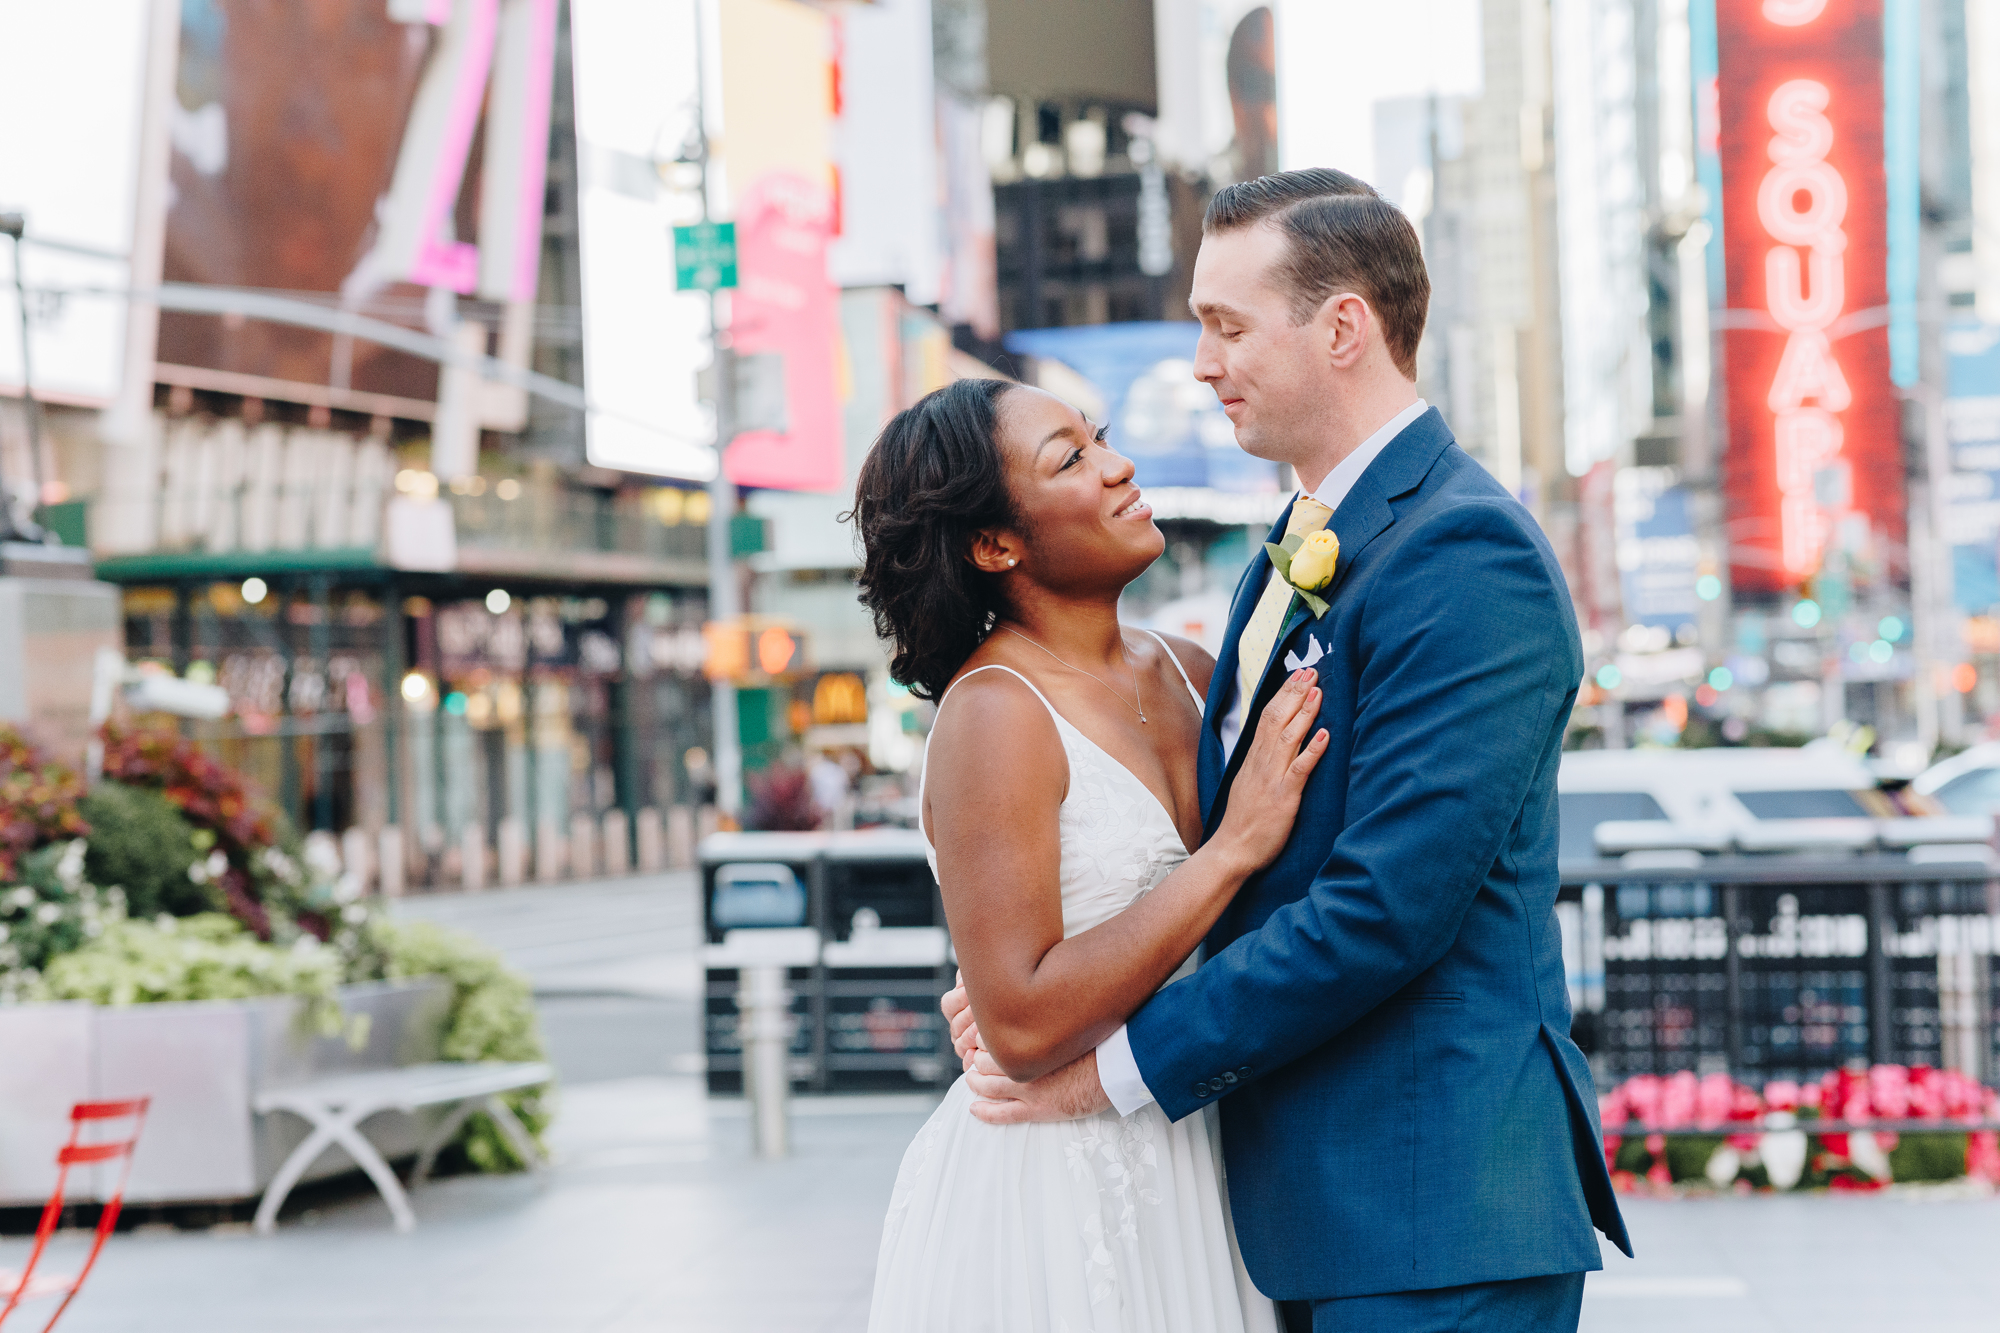 Jaw-Dropping Times Square Wedding Photos in NYC